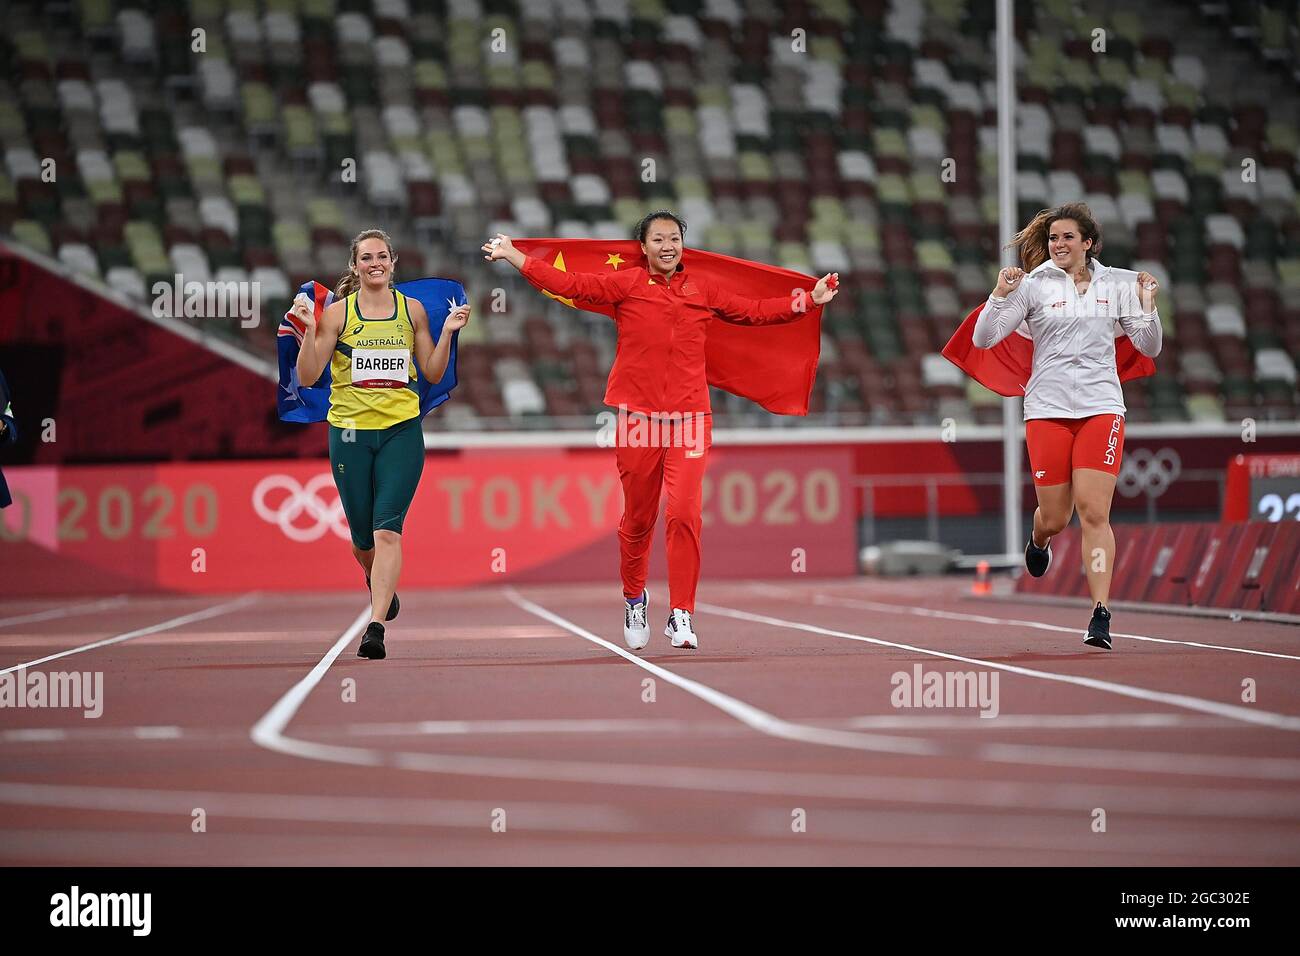 Tokyo, Japan. 6th Aug, 2021. (From L to R) Kelsey-Lee Barber of Australia, Liu Shiying of China and Maria Andrejczyk of Poland celebrate after the women's javelin throw final at Tokyo 2020 Olympic Games, in Tokyo, Japan, Aug. 6, 2021. Credit: Jia Yuchen/Xinhua/Alamy Live News Stock Photo